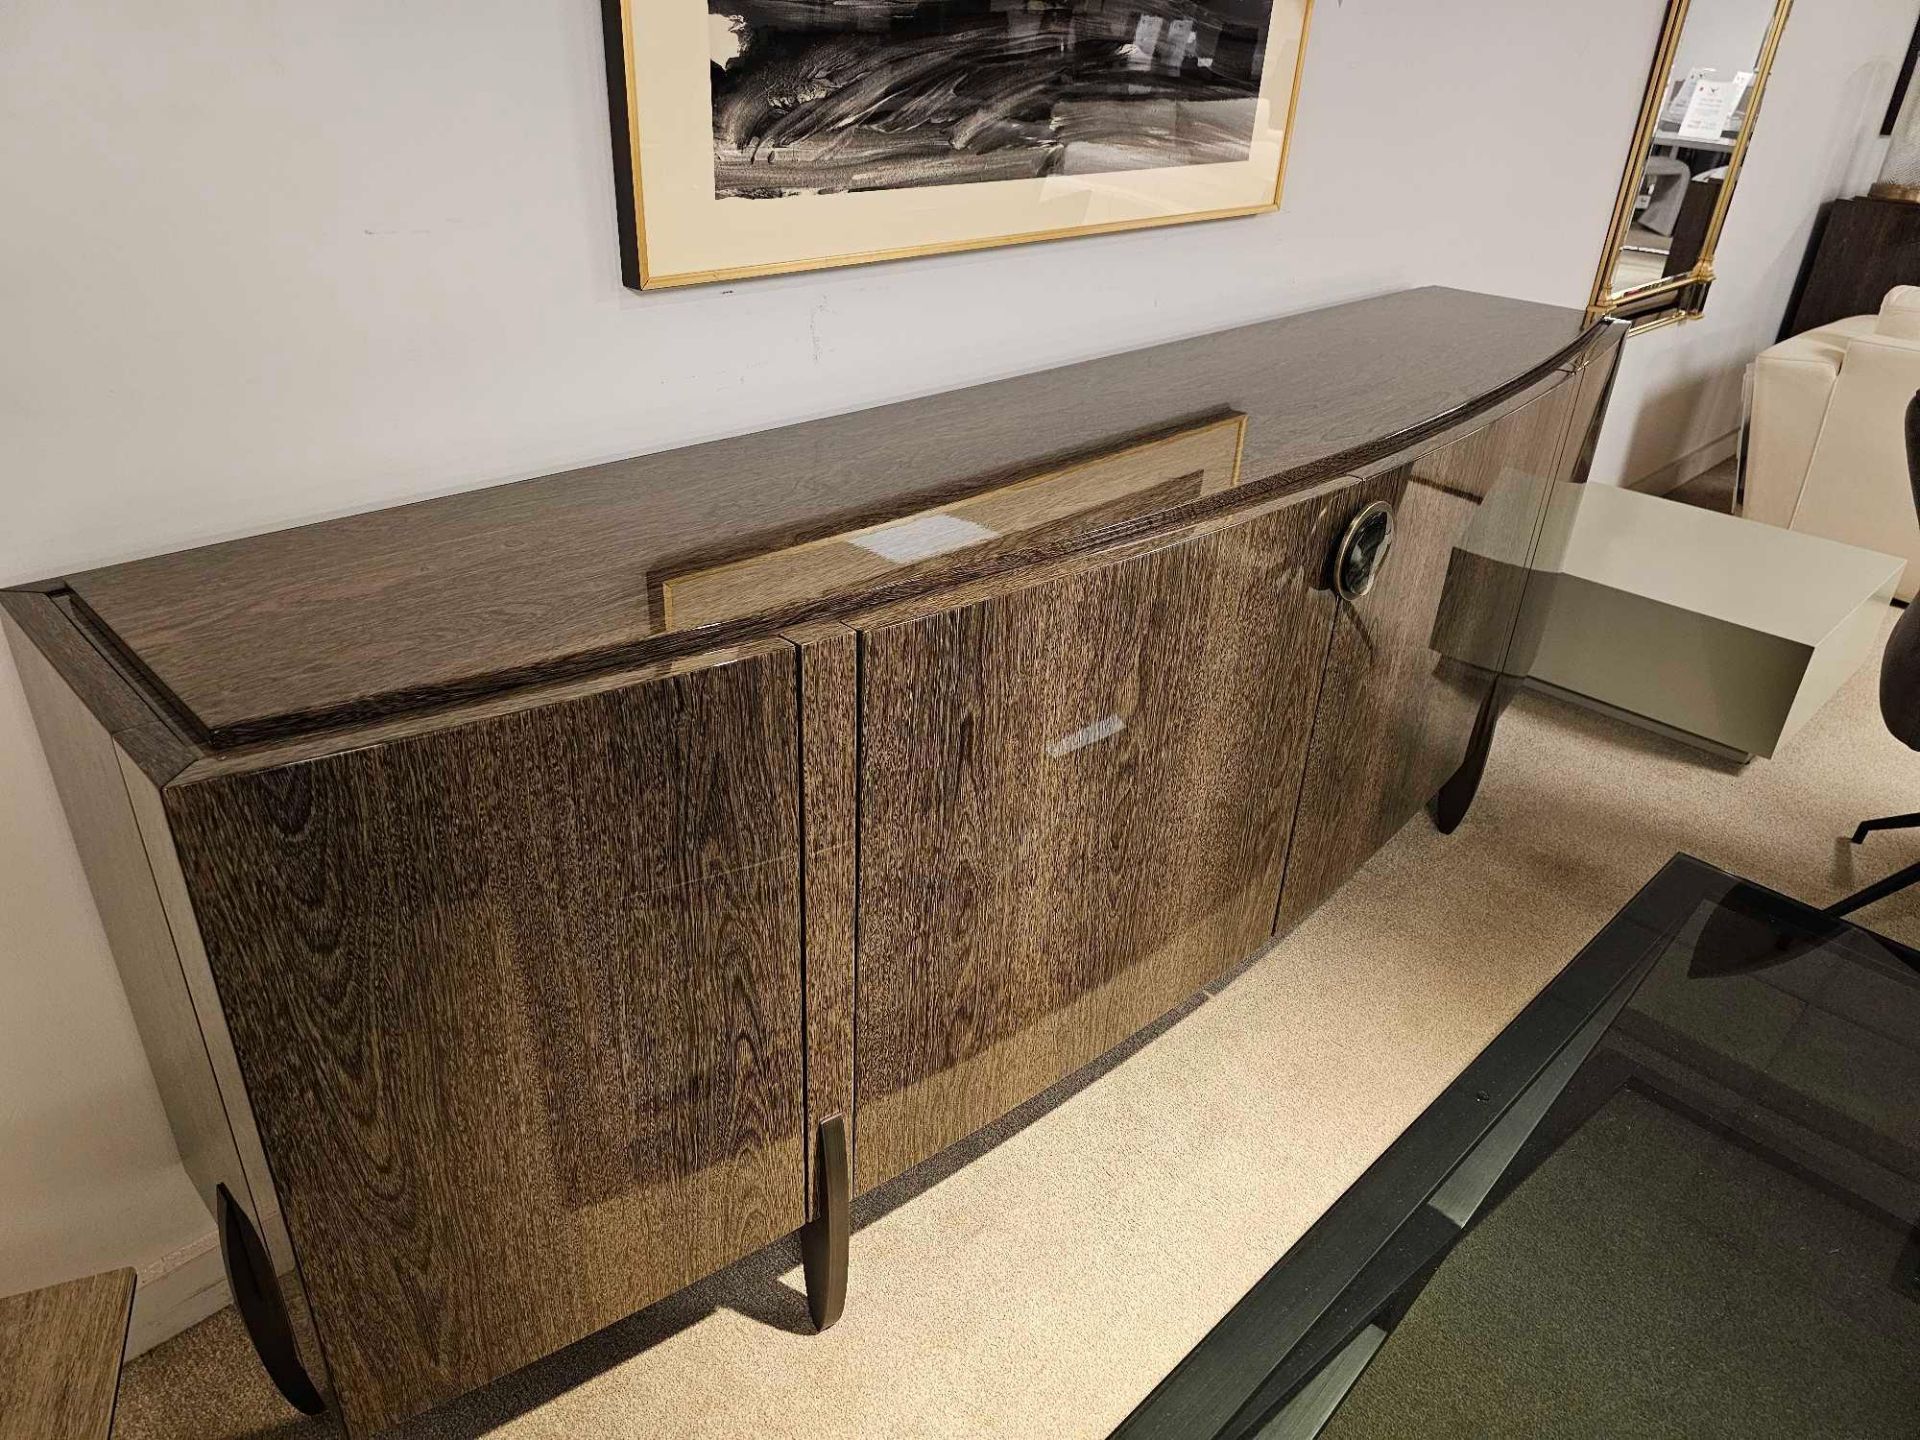 Fashion Affair Large Sideboard by Telemaco for Malerba The Buffet, for the living room, is shaped by - Image 3 of 25